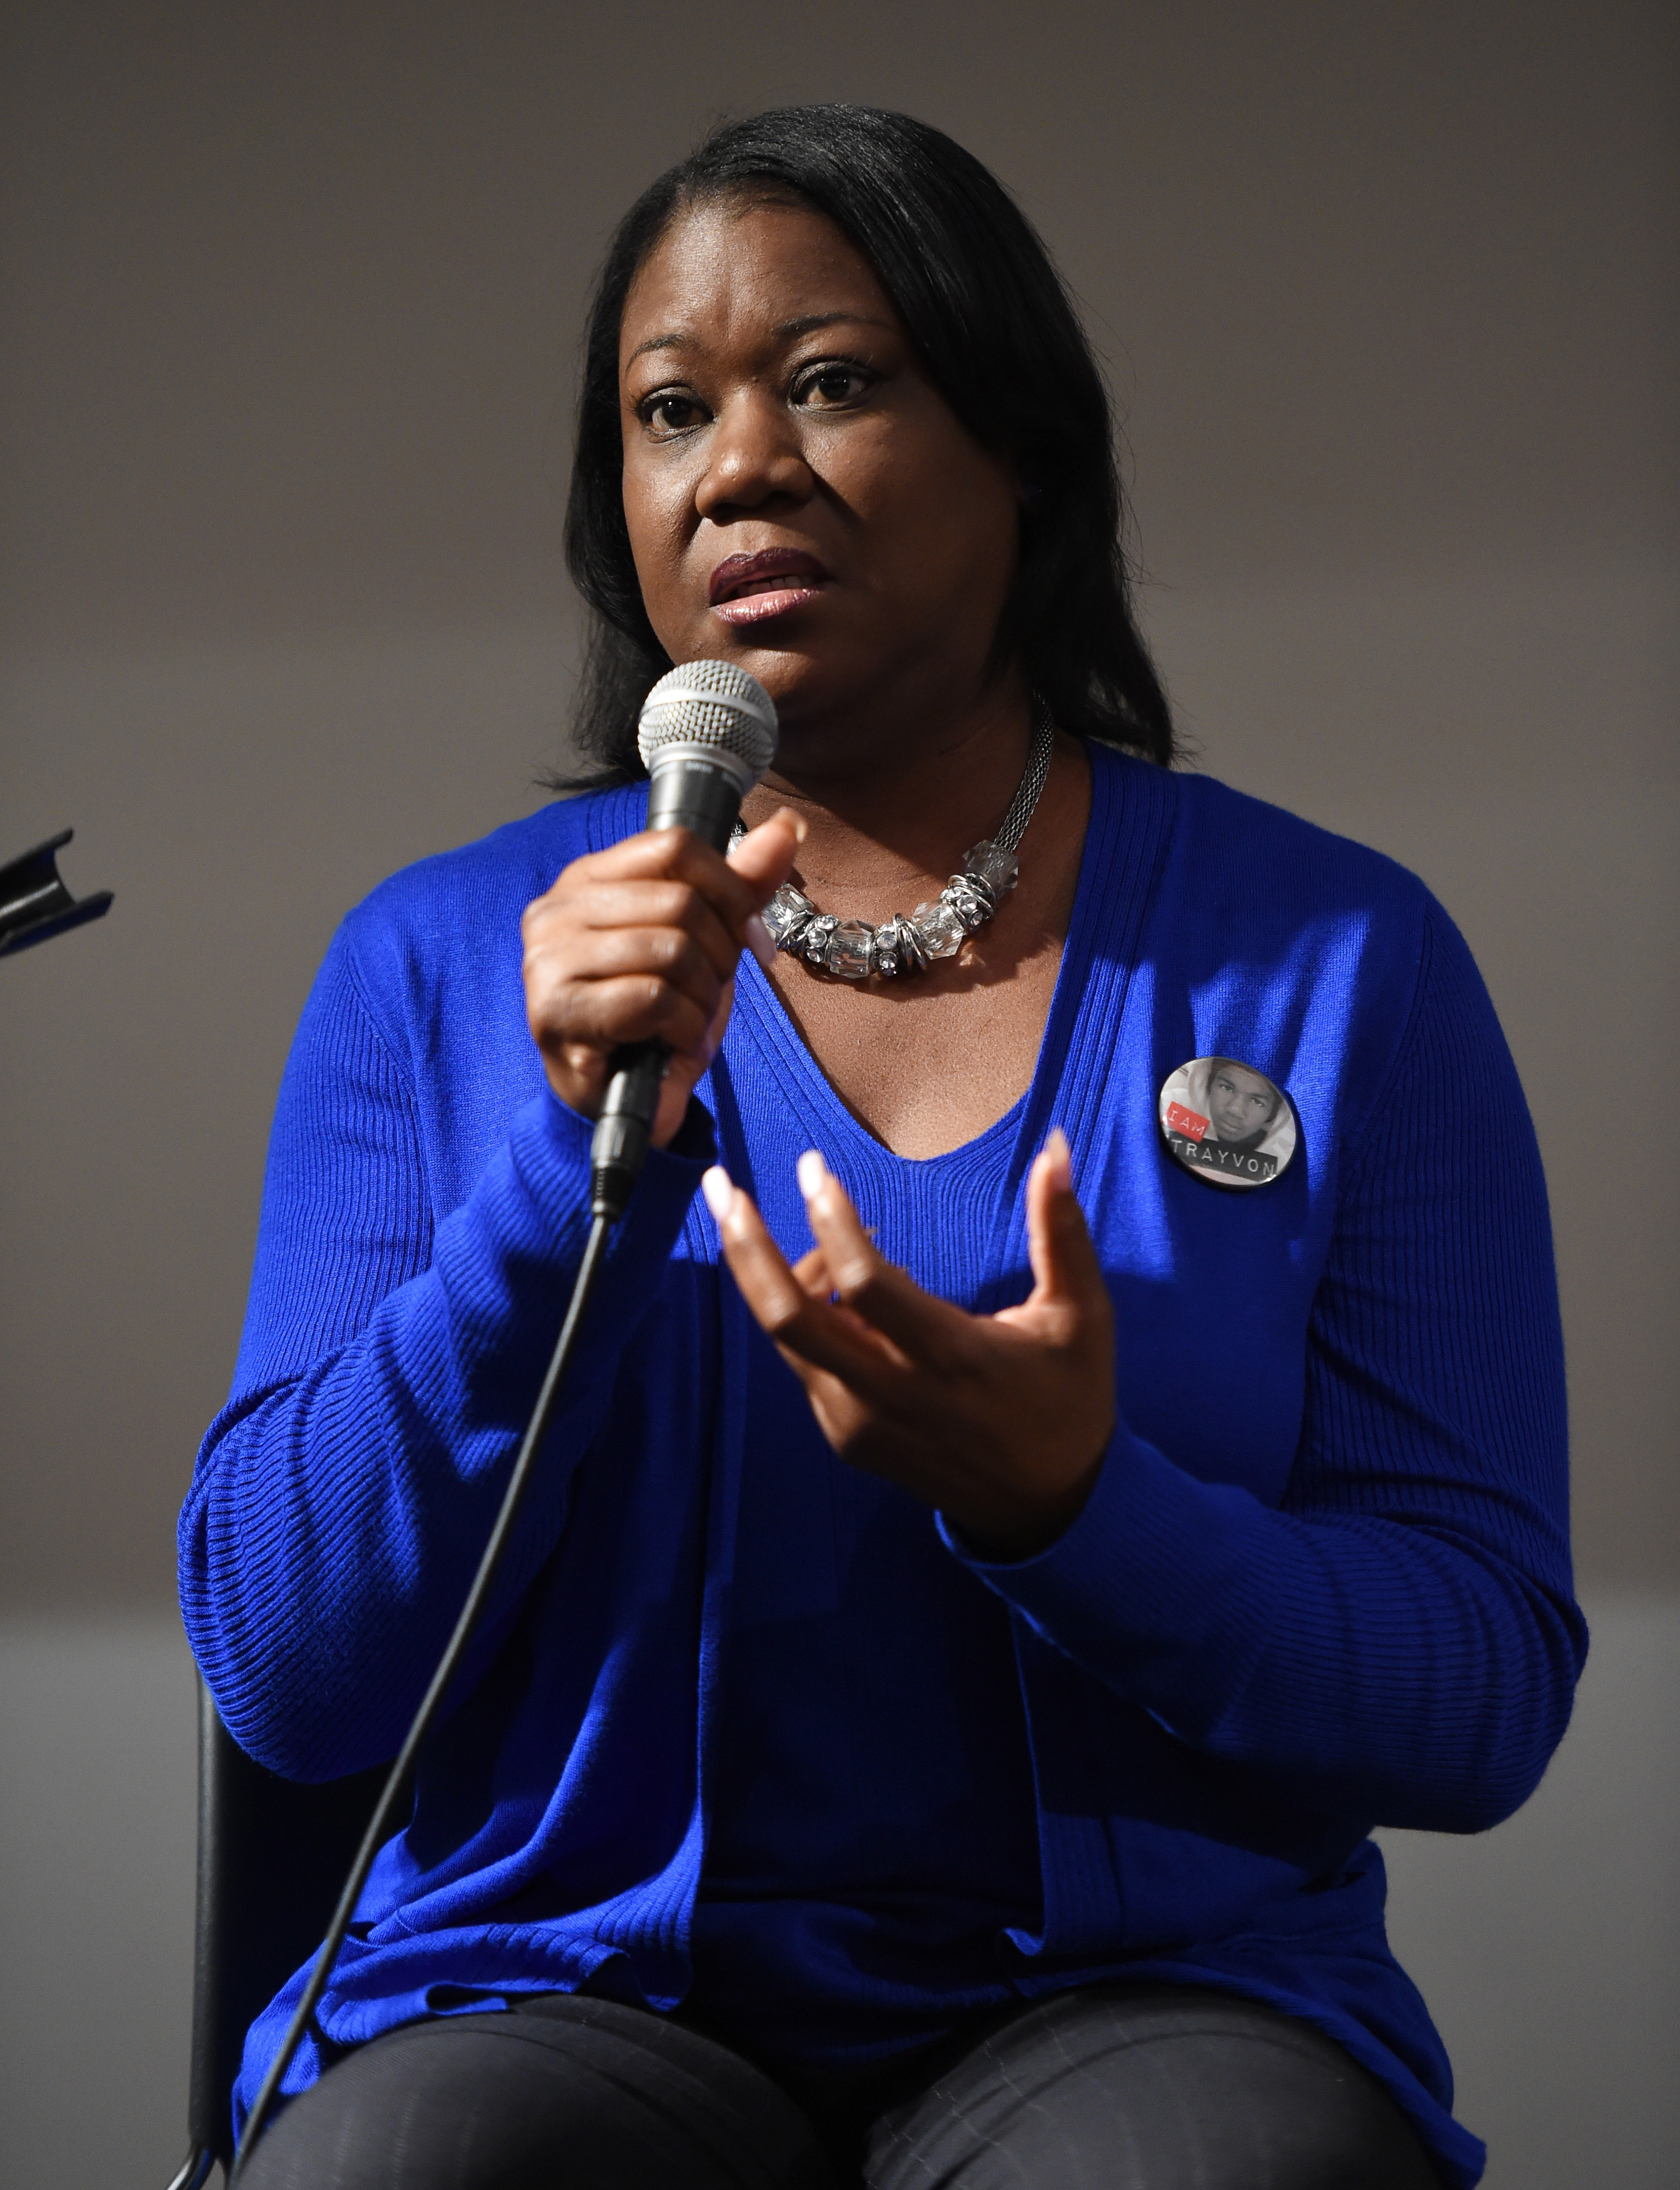 Activist Sybrina Fulton participates in a panel conversation at the Manifest: Justice pop-up art space on May 6, 2015 in Los Angeles. (Amanda Edwards—Getty Images)